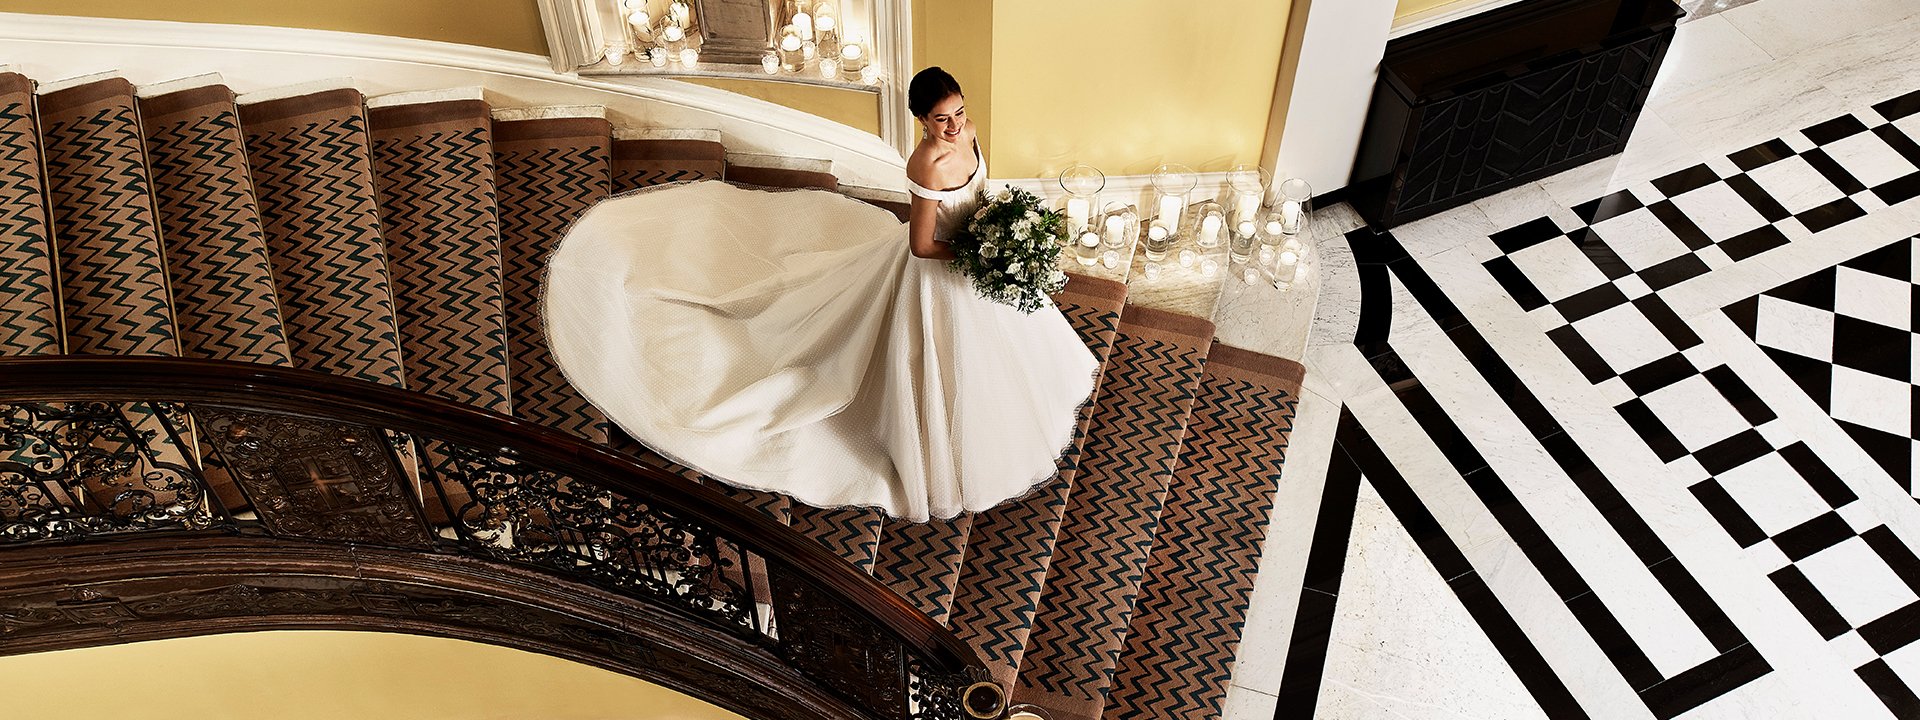 A beautiful and smiling bride with a bouquet in her hands going down the luxurious stairs.